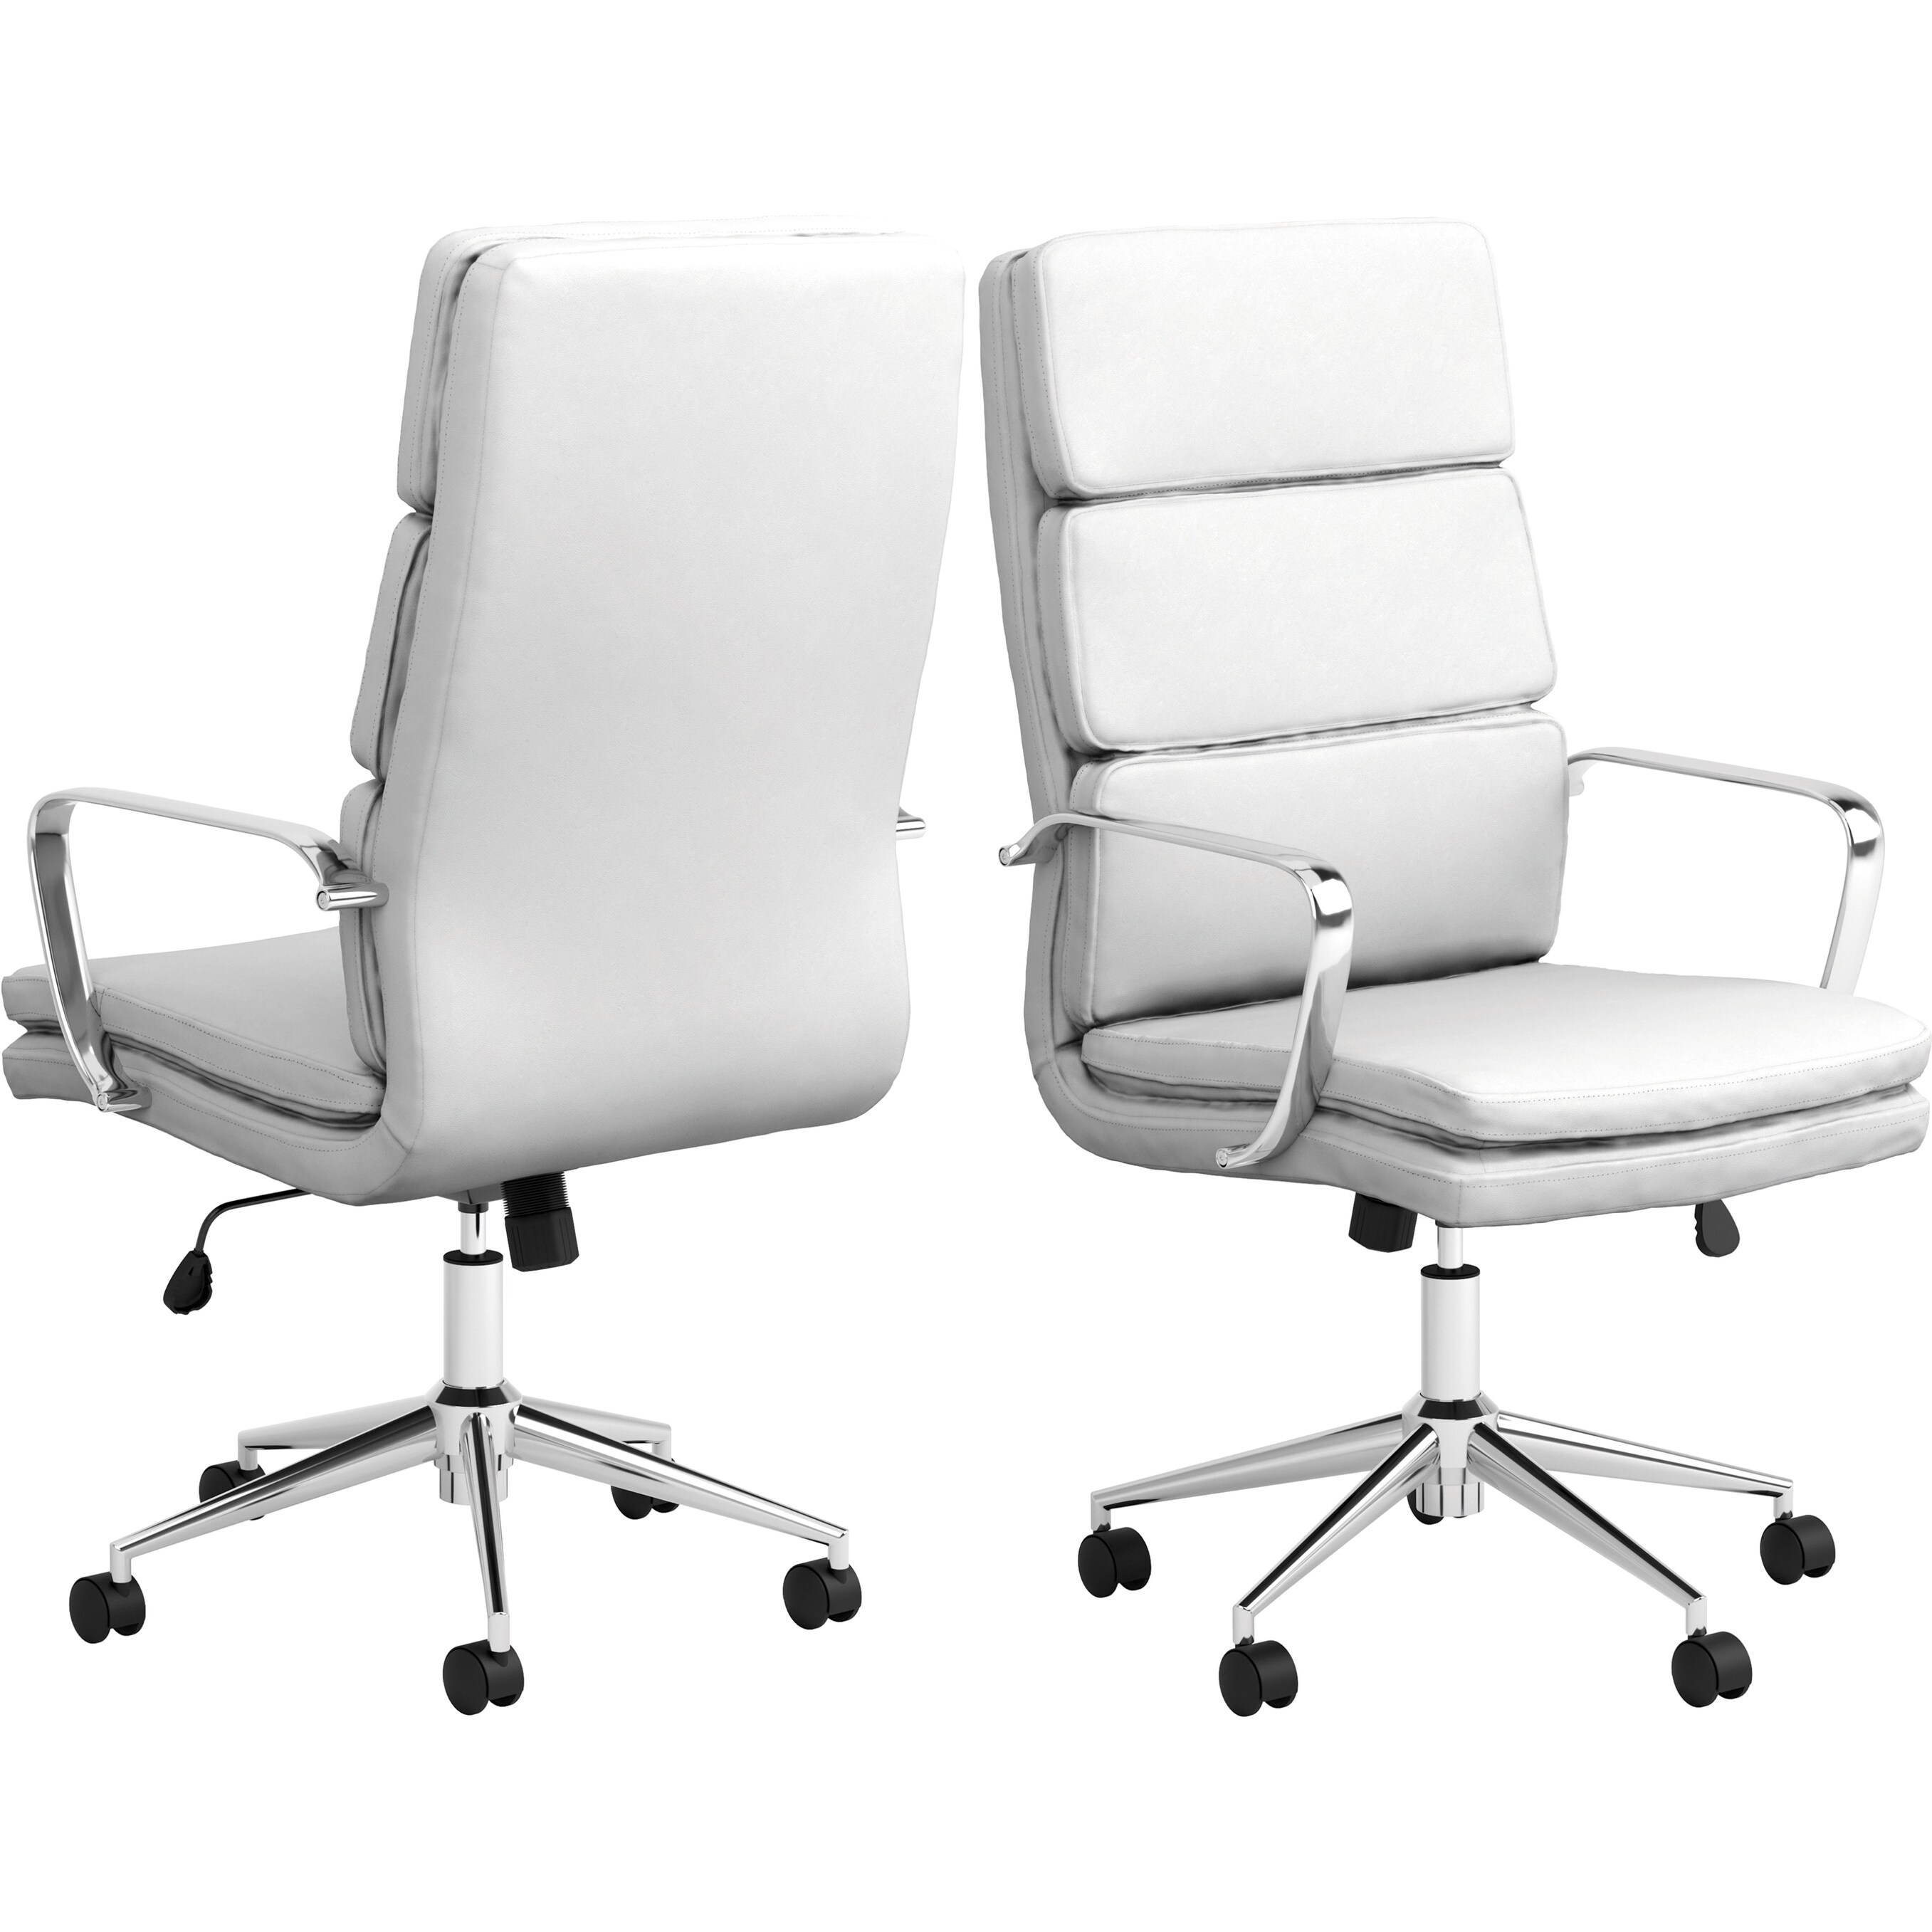 https://ak1.ostkcdn.com/images/products/is/images/direct/1cceffaddd81fd12e239cf3fbf7a2b10816a1a8e/Contemporary-Modern-Design-White-Office-Chair-with-Chrome-Base.jpg